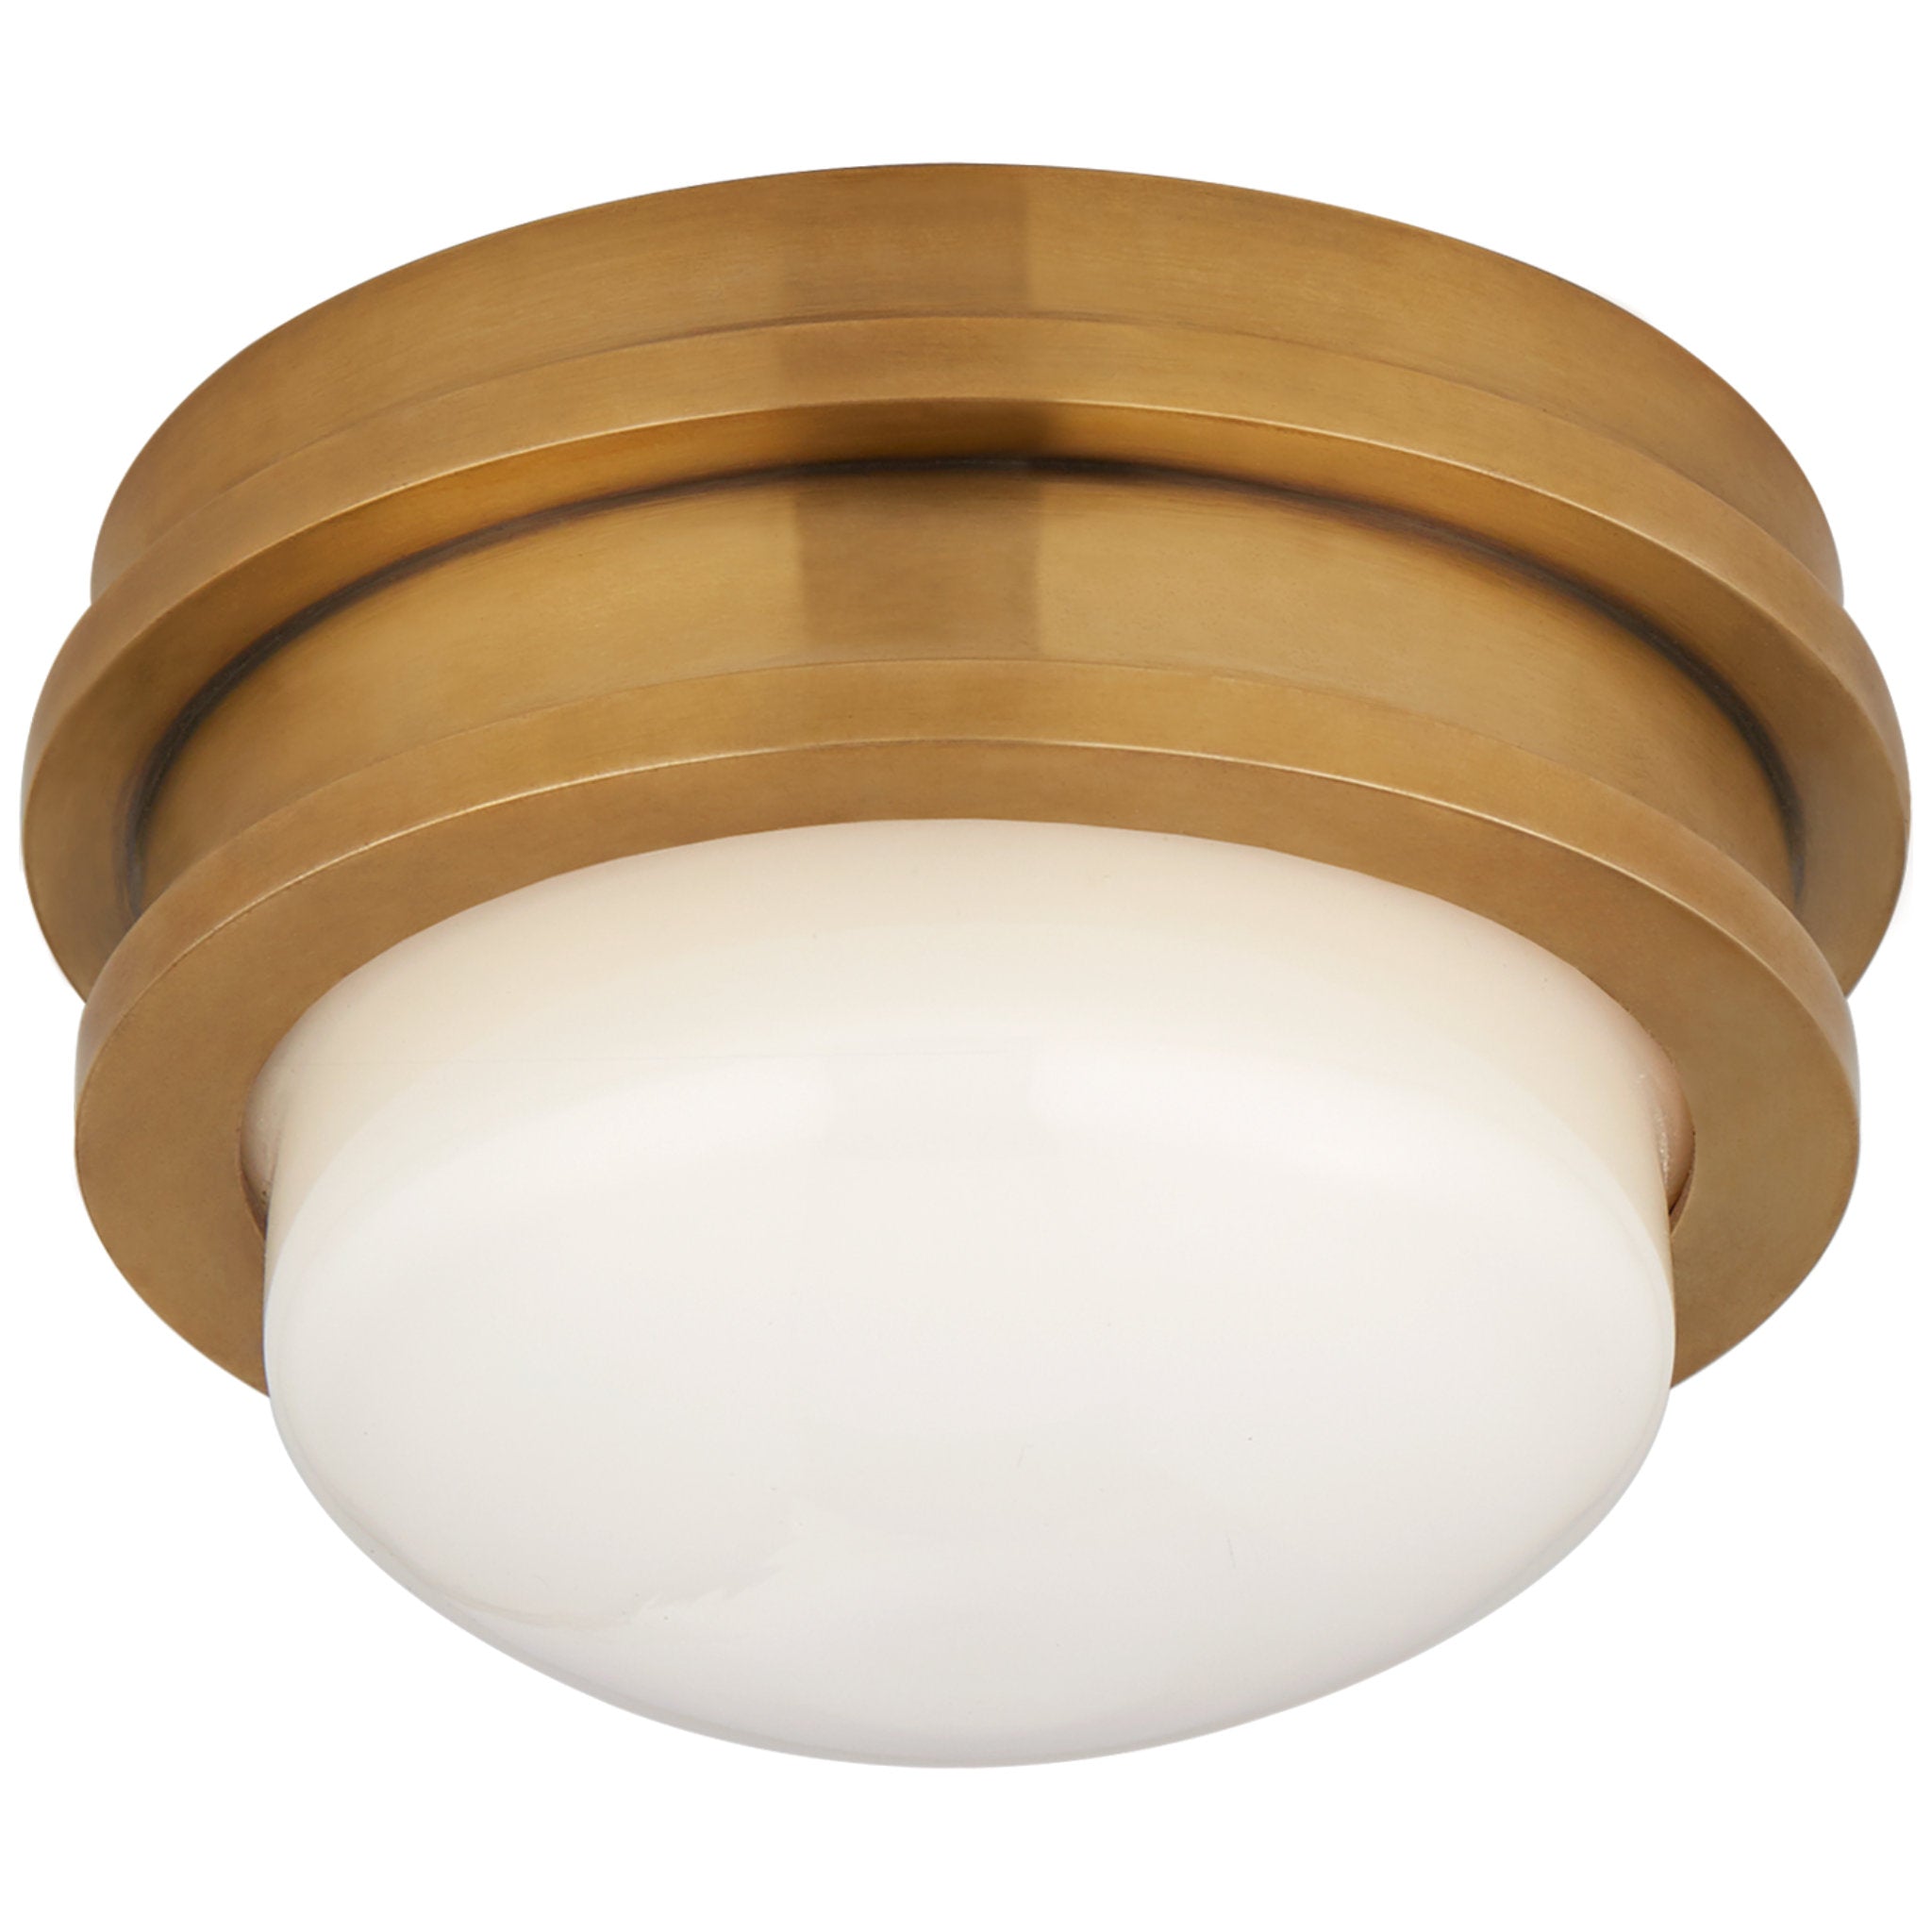 Chapman & Myers Launceton 5" Solitaire Flush Mount in Antique-Burnished Brass with White Glass